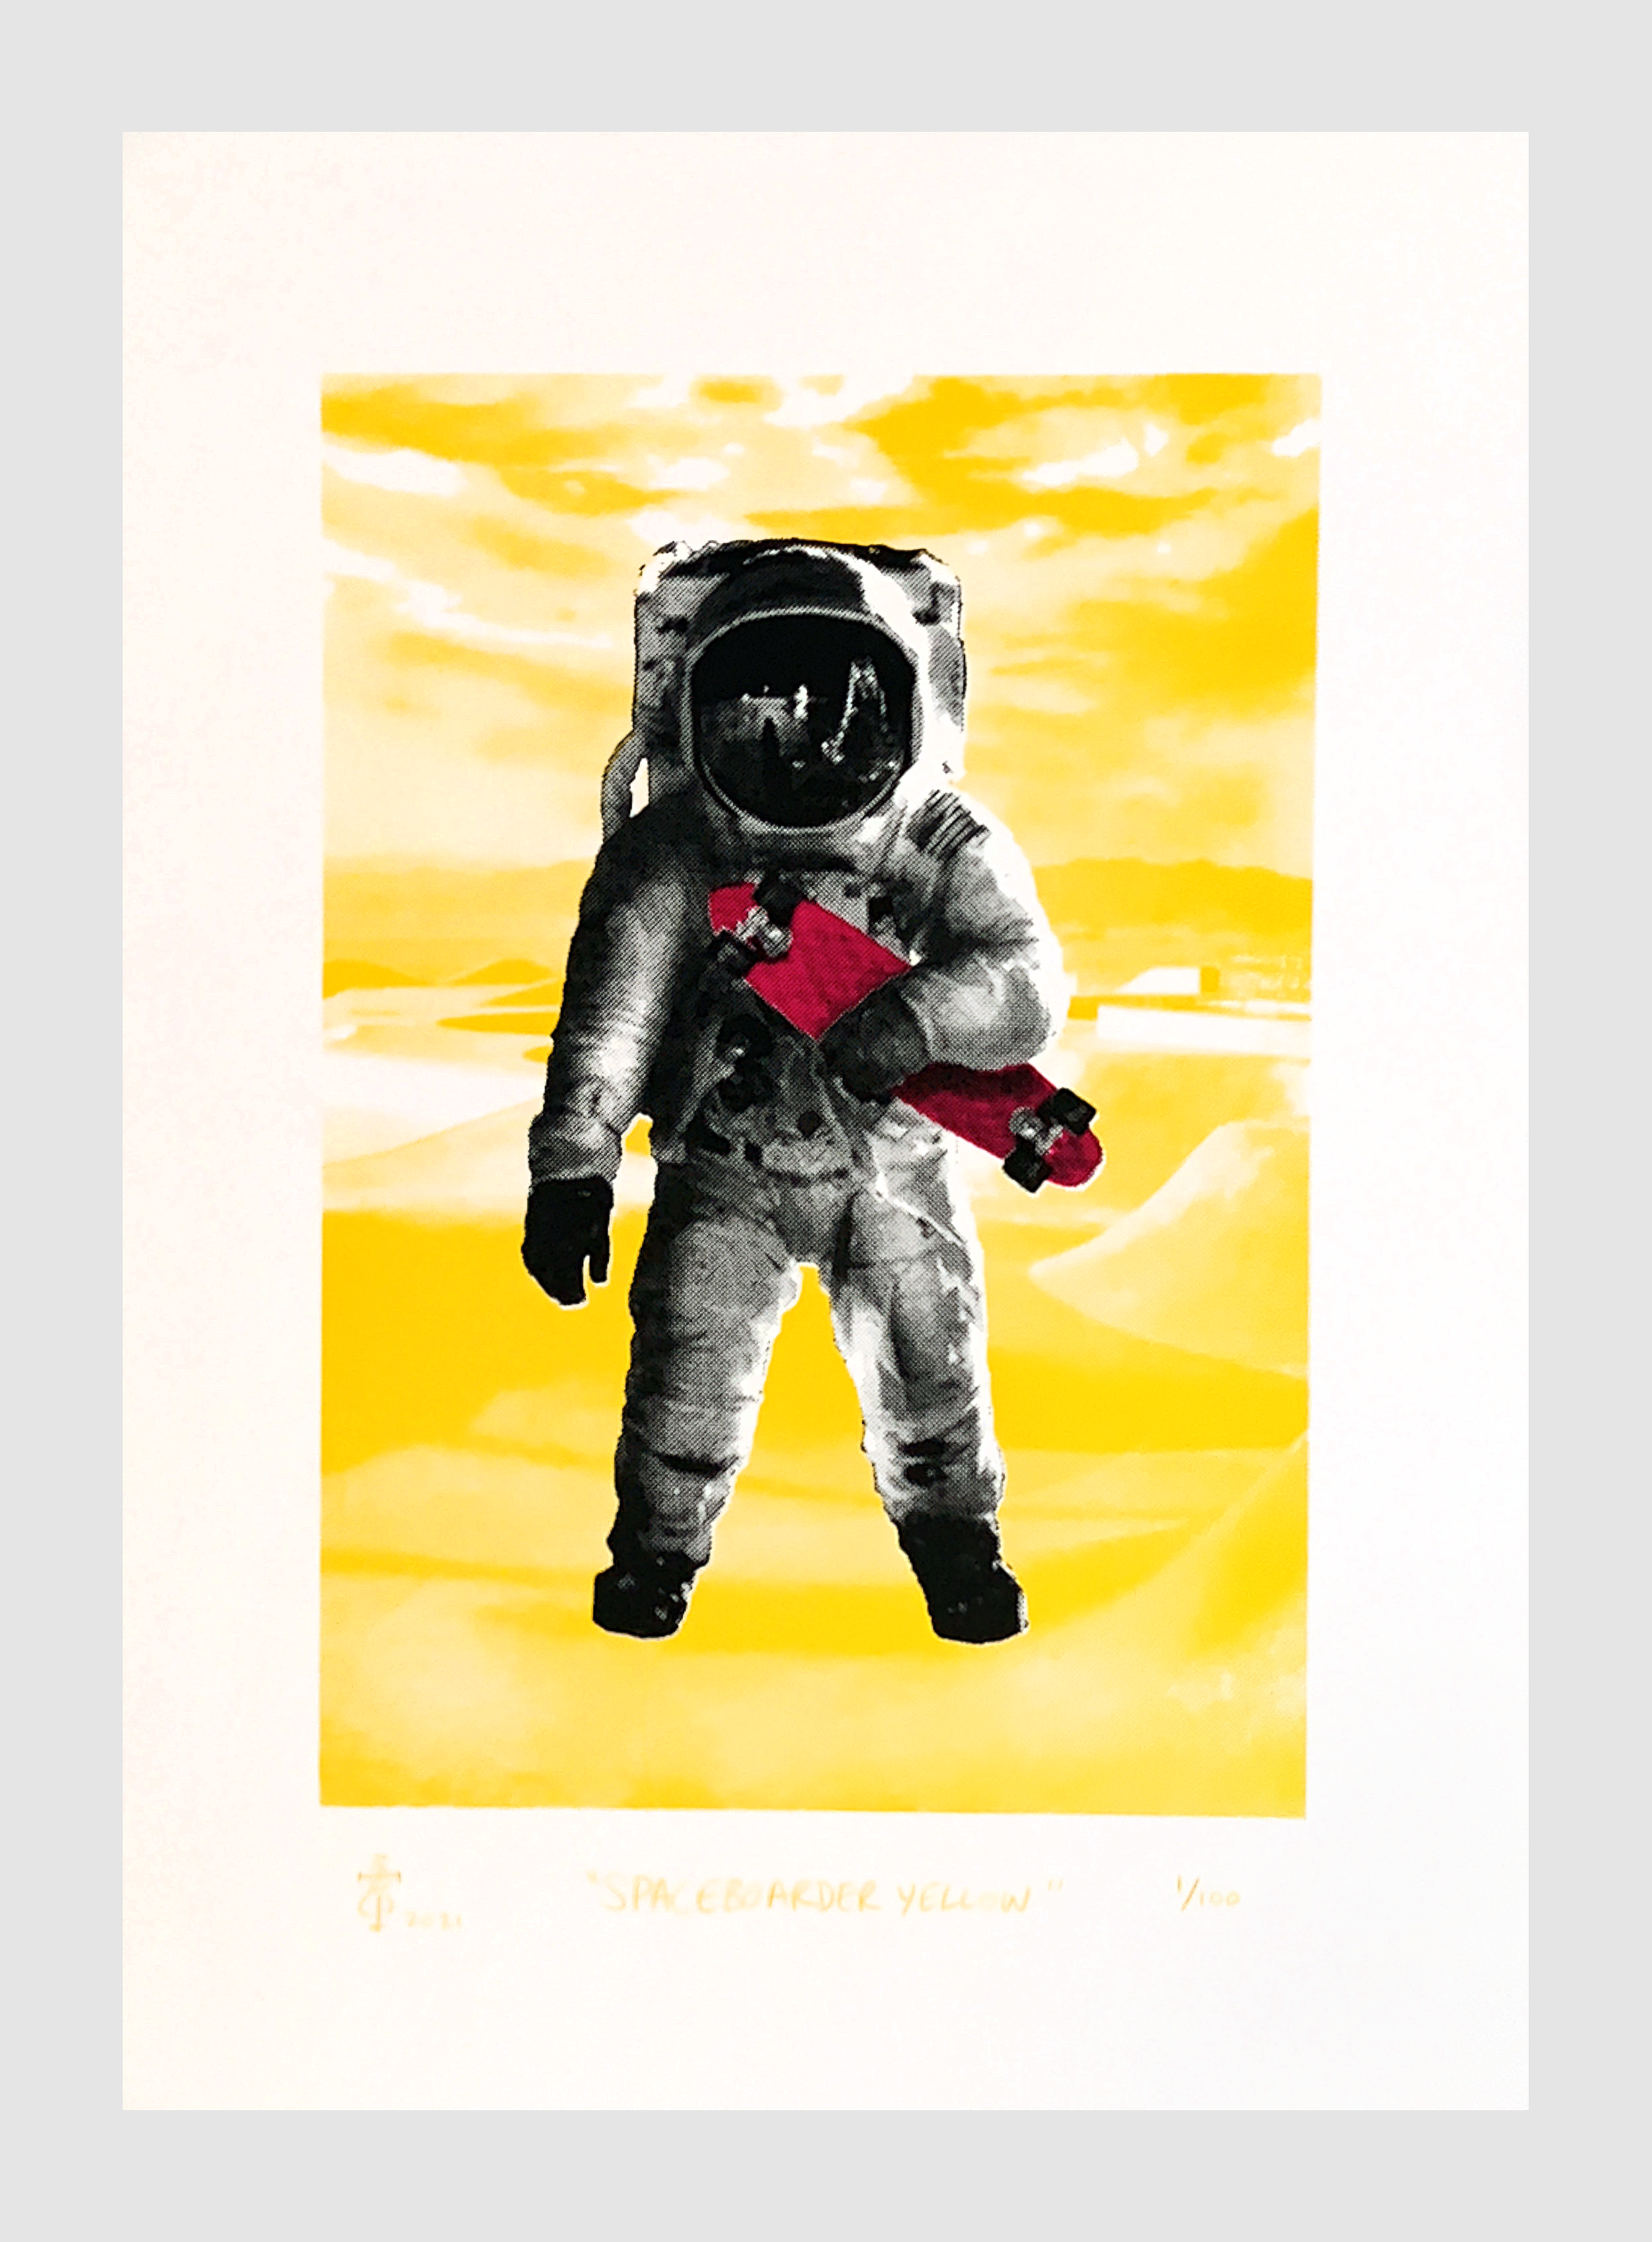   Spaceboarder (Yellow), 2021   Silkscreen on rag paper, 14.5 x 10 in (image size), 21 x 15 in (paper size), edition of 100   PURCHASE  